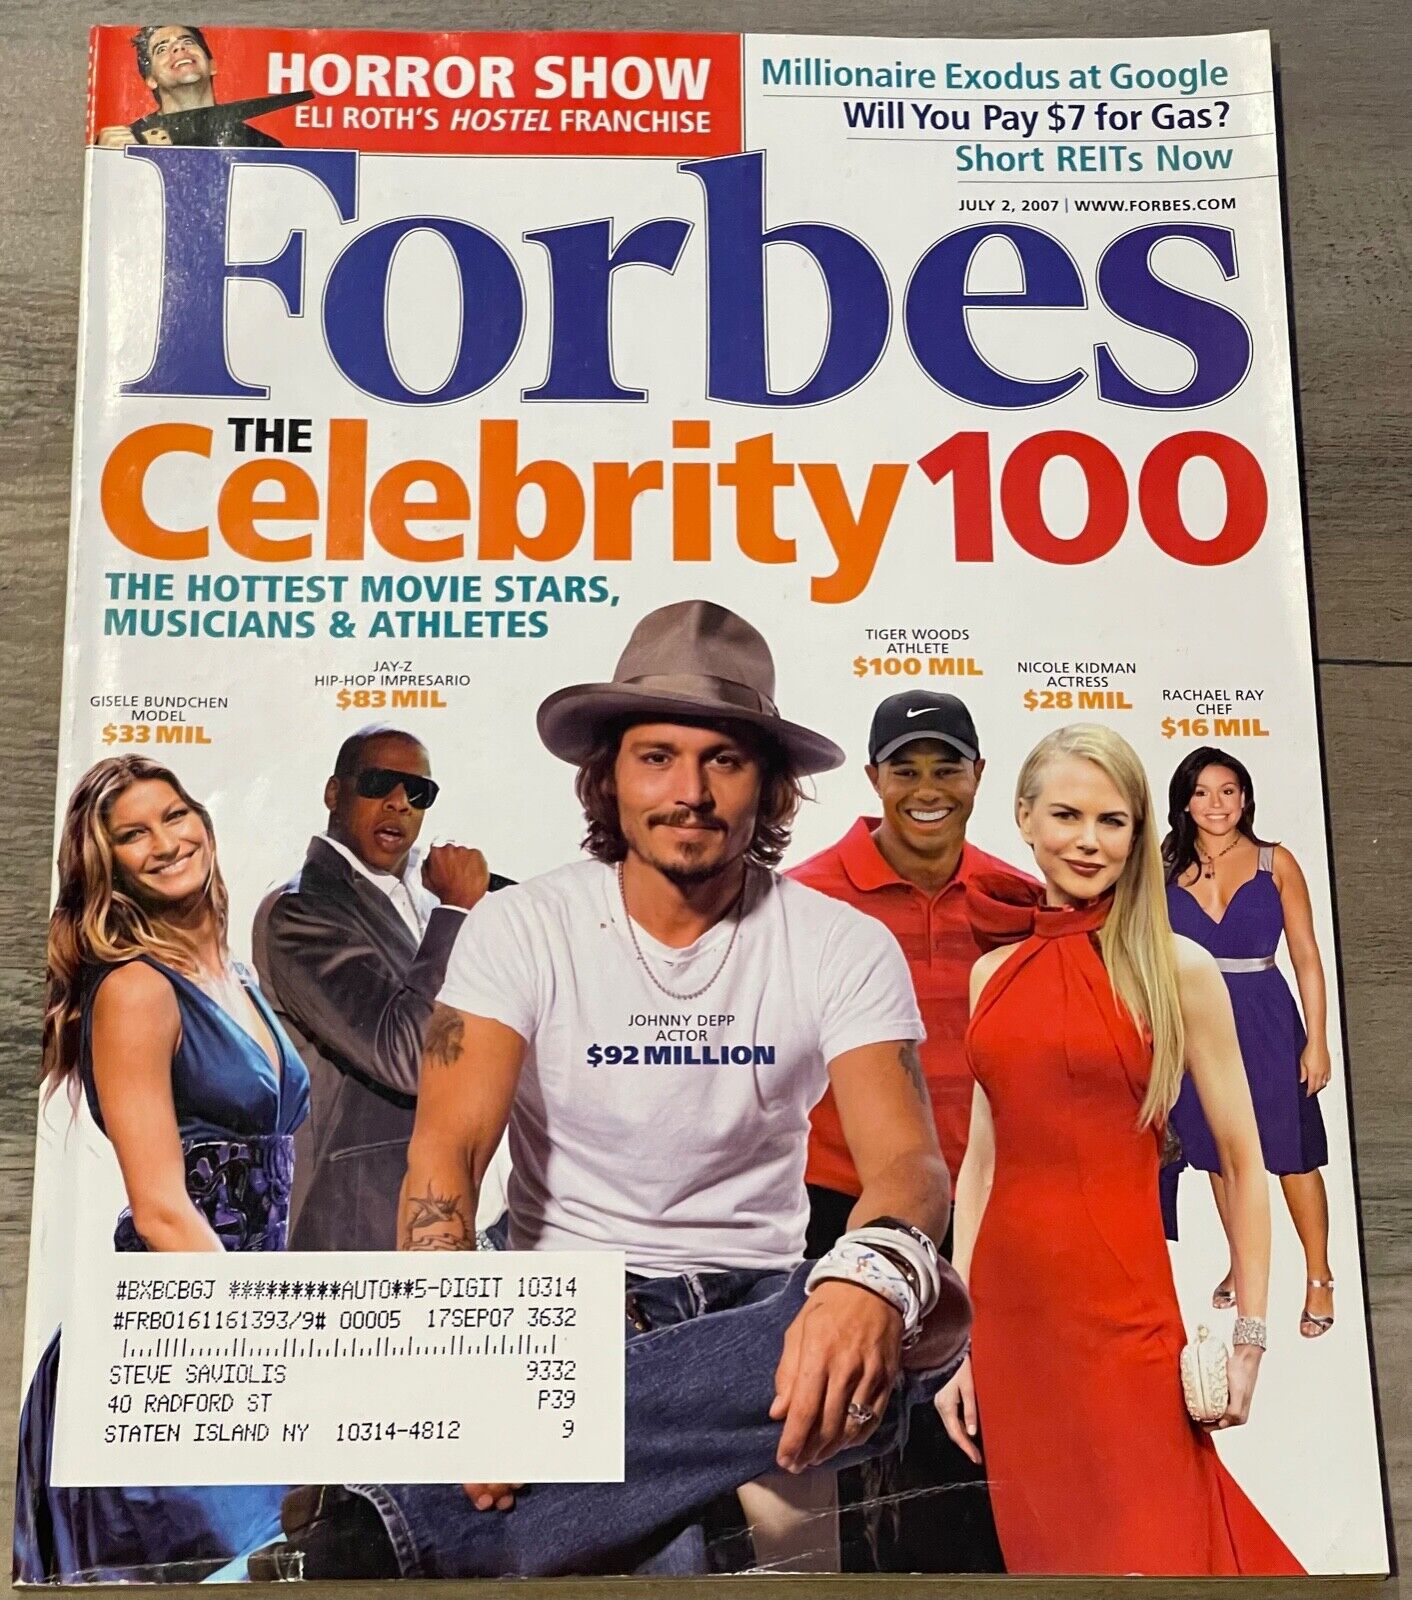 Forbes Magazine The Celebrity 100 Net Worth July 2007 Will You Pay $7 For Gas?